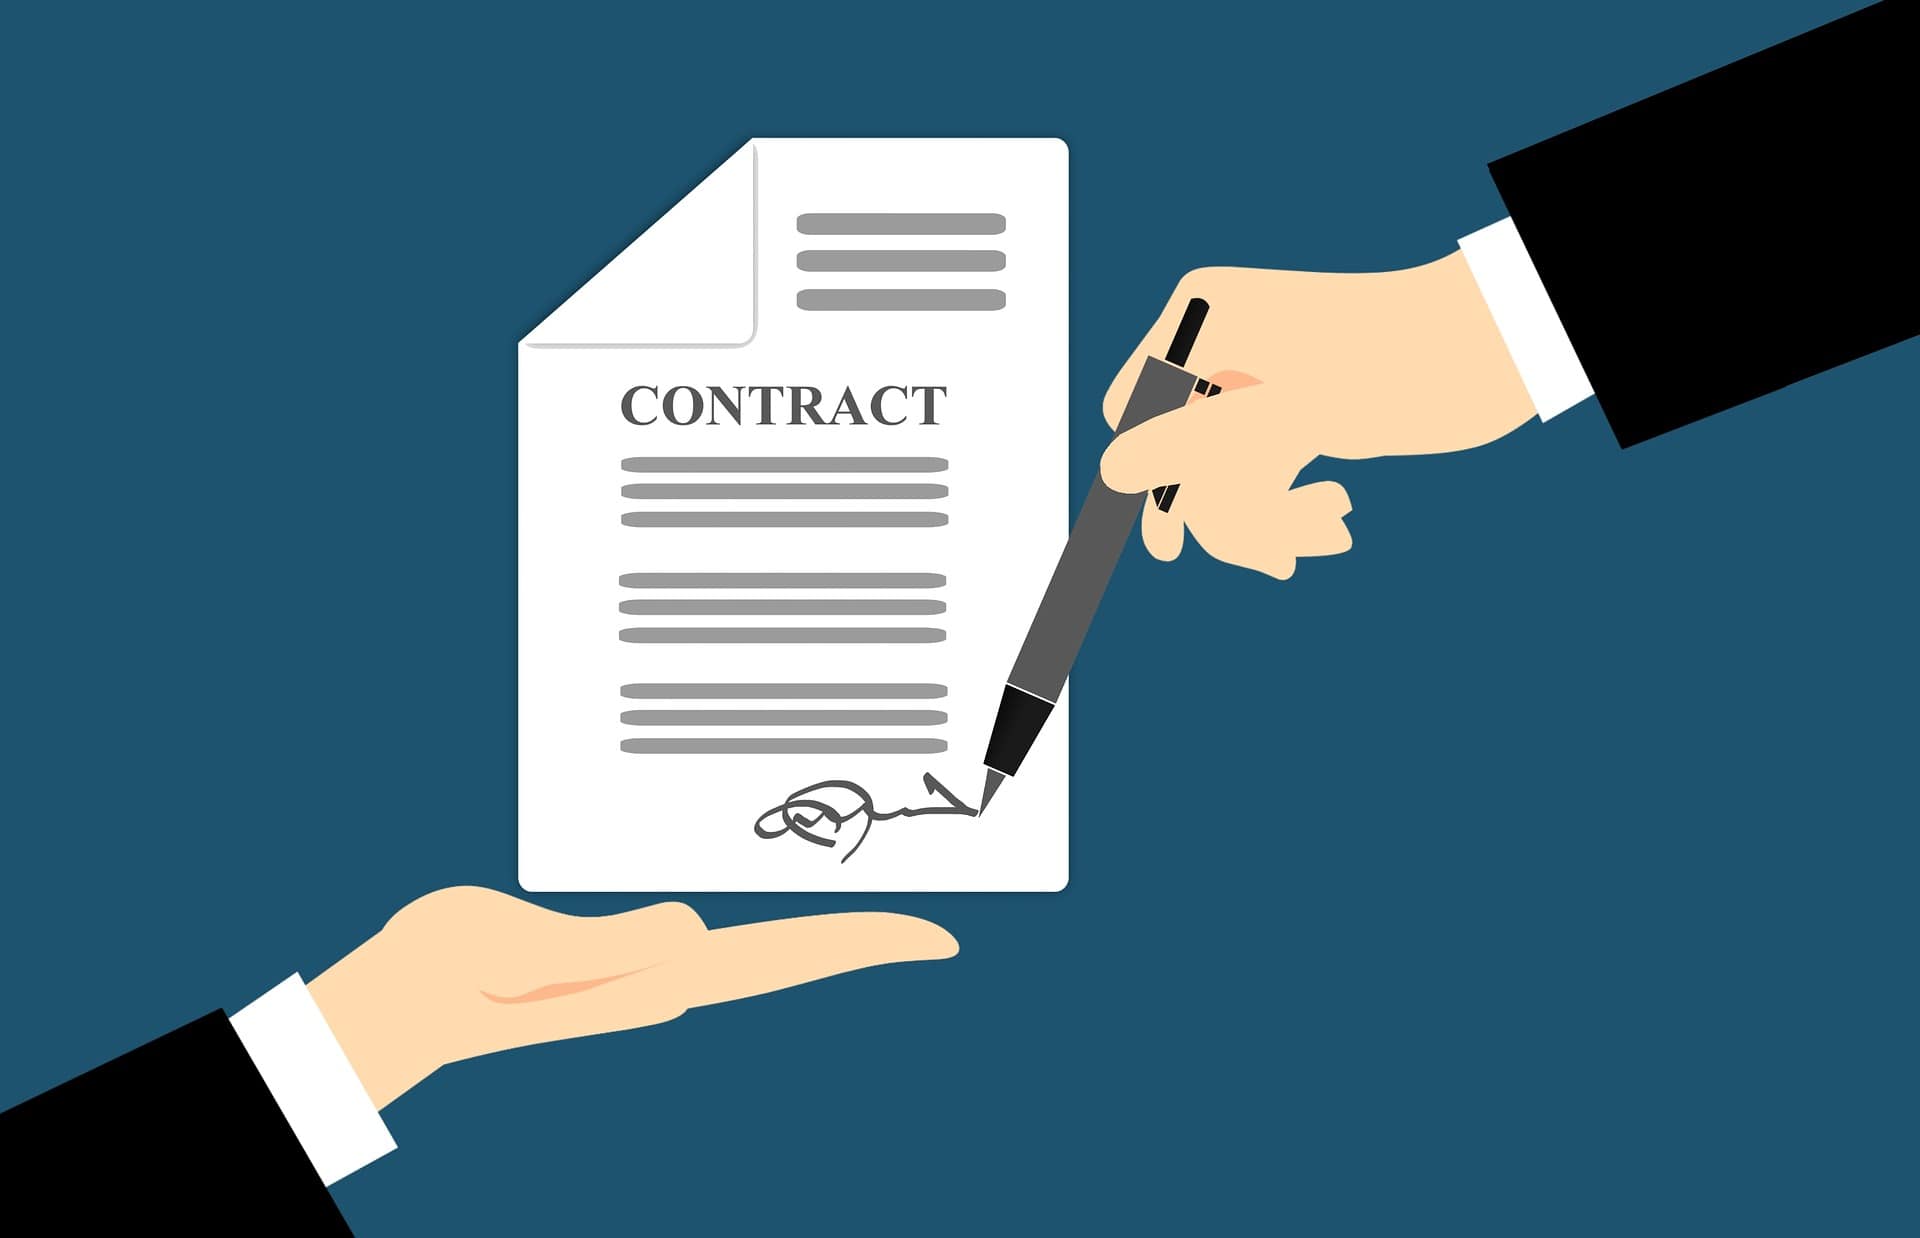 How Do I Get Out Of A Contract?